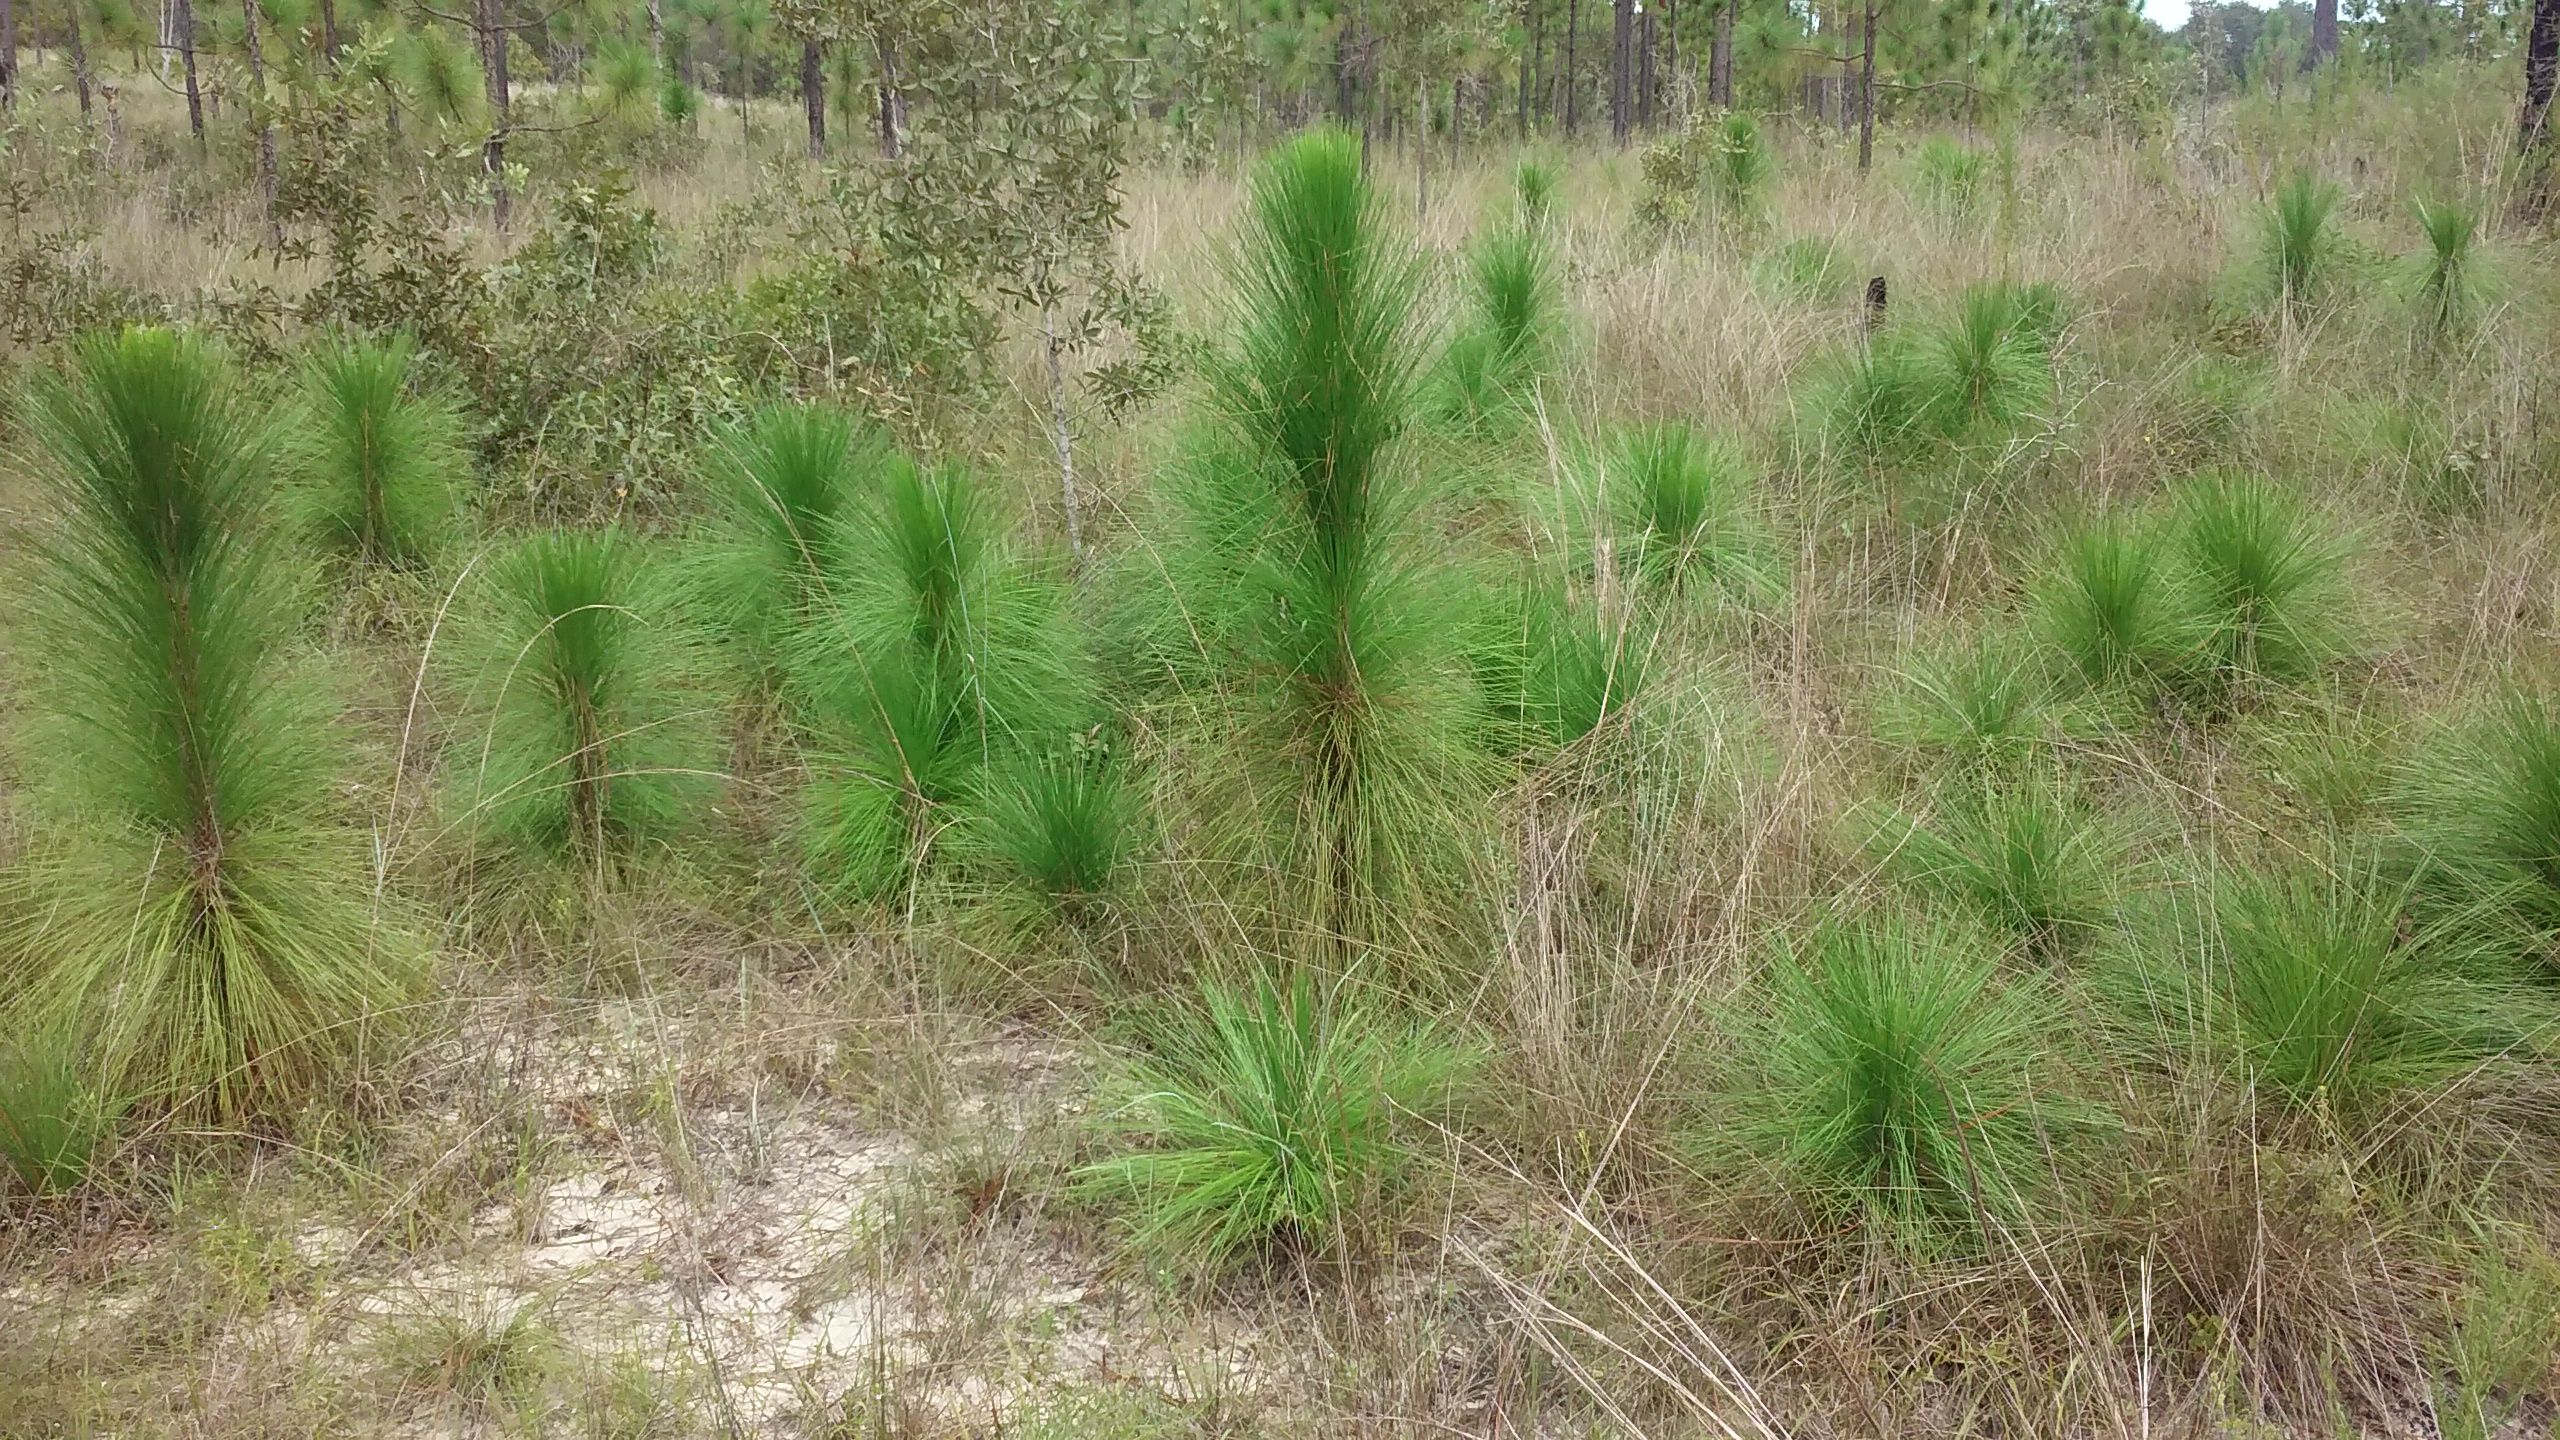 Group of young longleaf pine trees in the forest at Apalachicola Bluffs and Ravines Preserve.